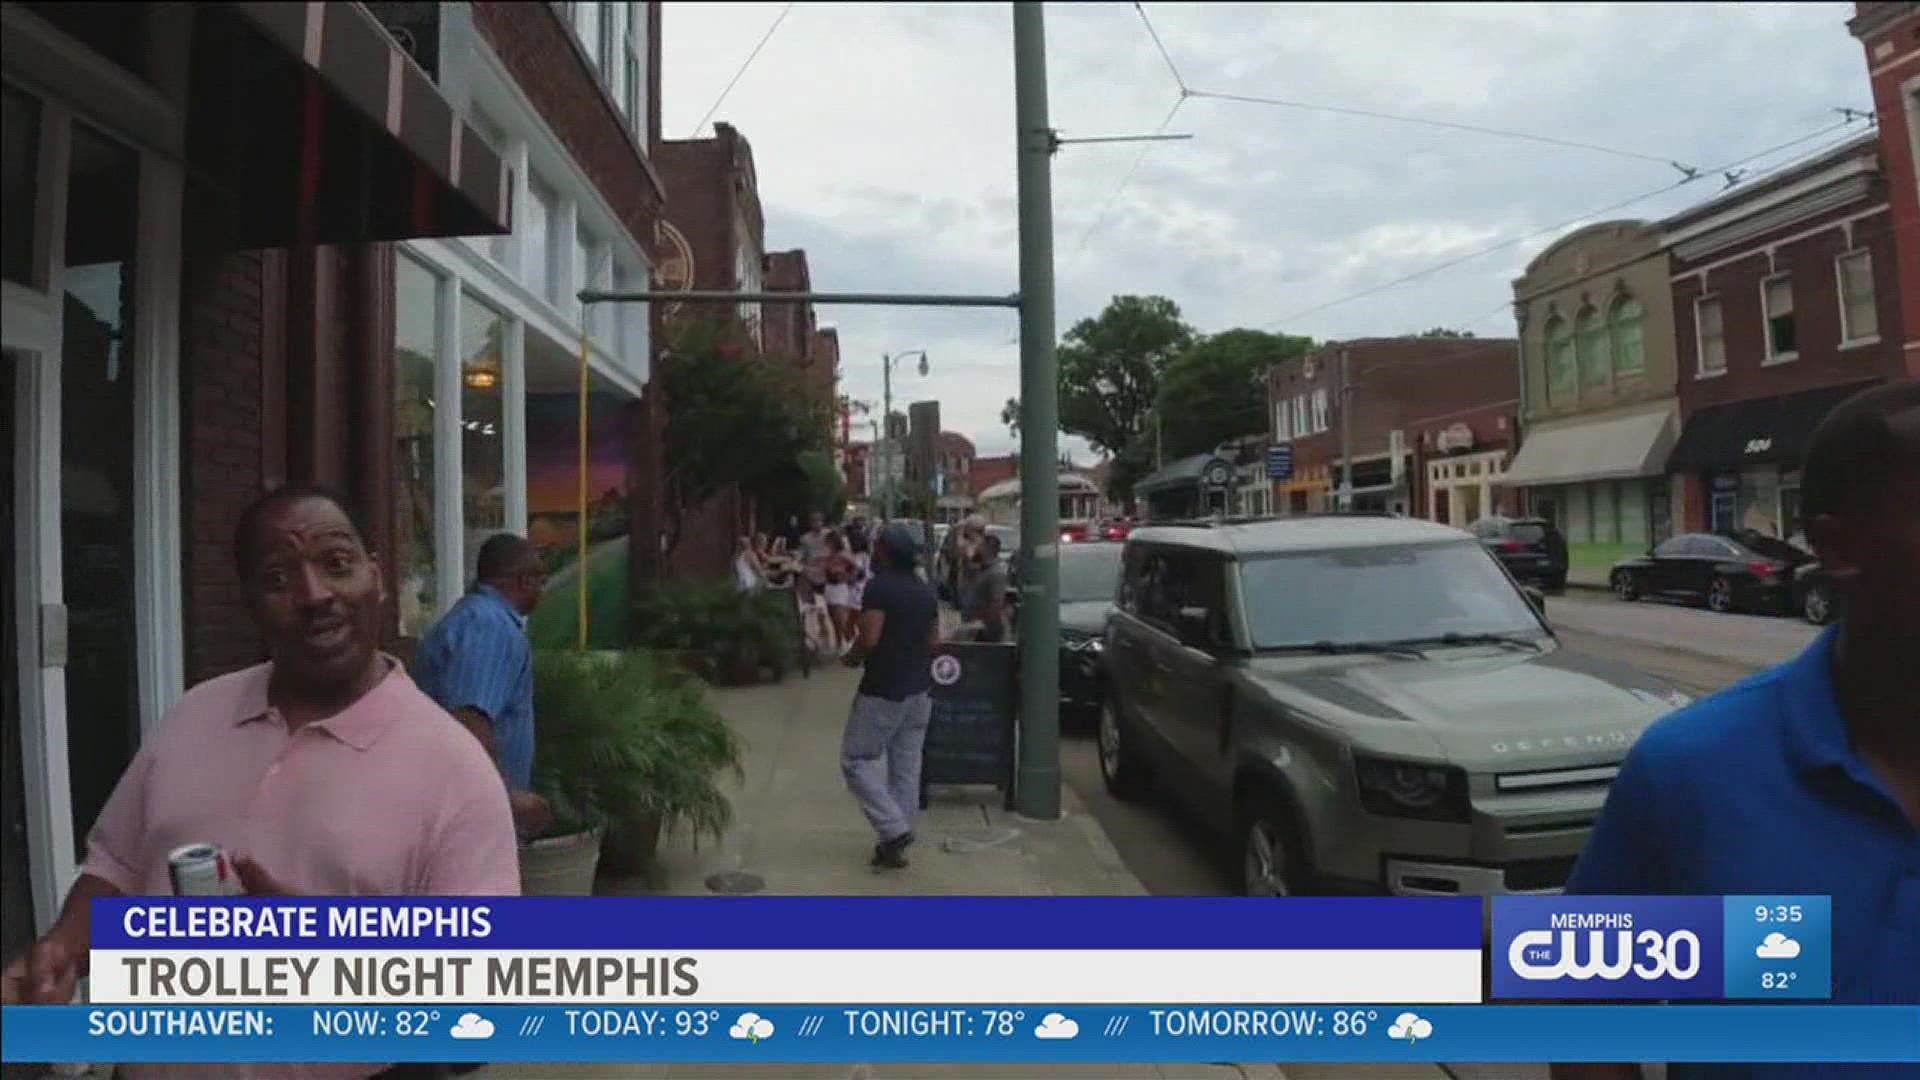 As we near the end of July, we're highlighting Trolley Night in downtown Memphis.